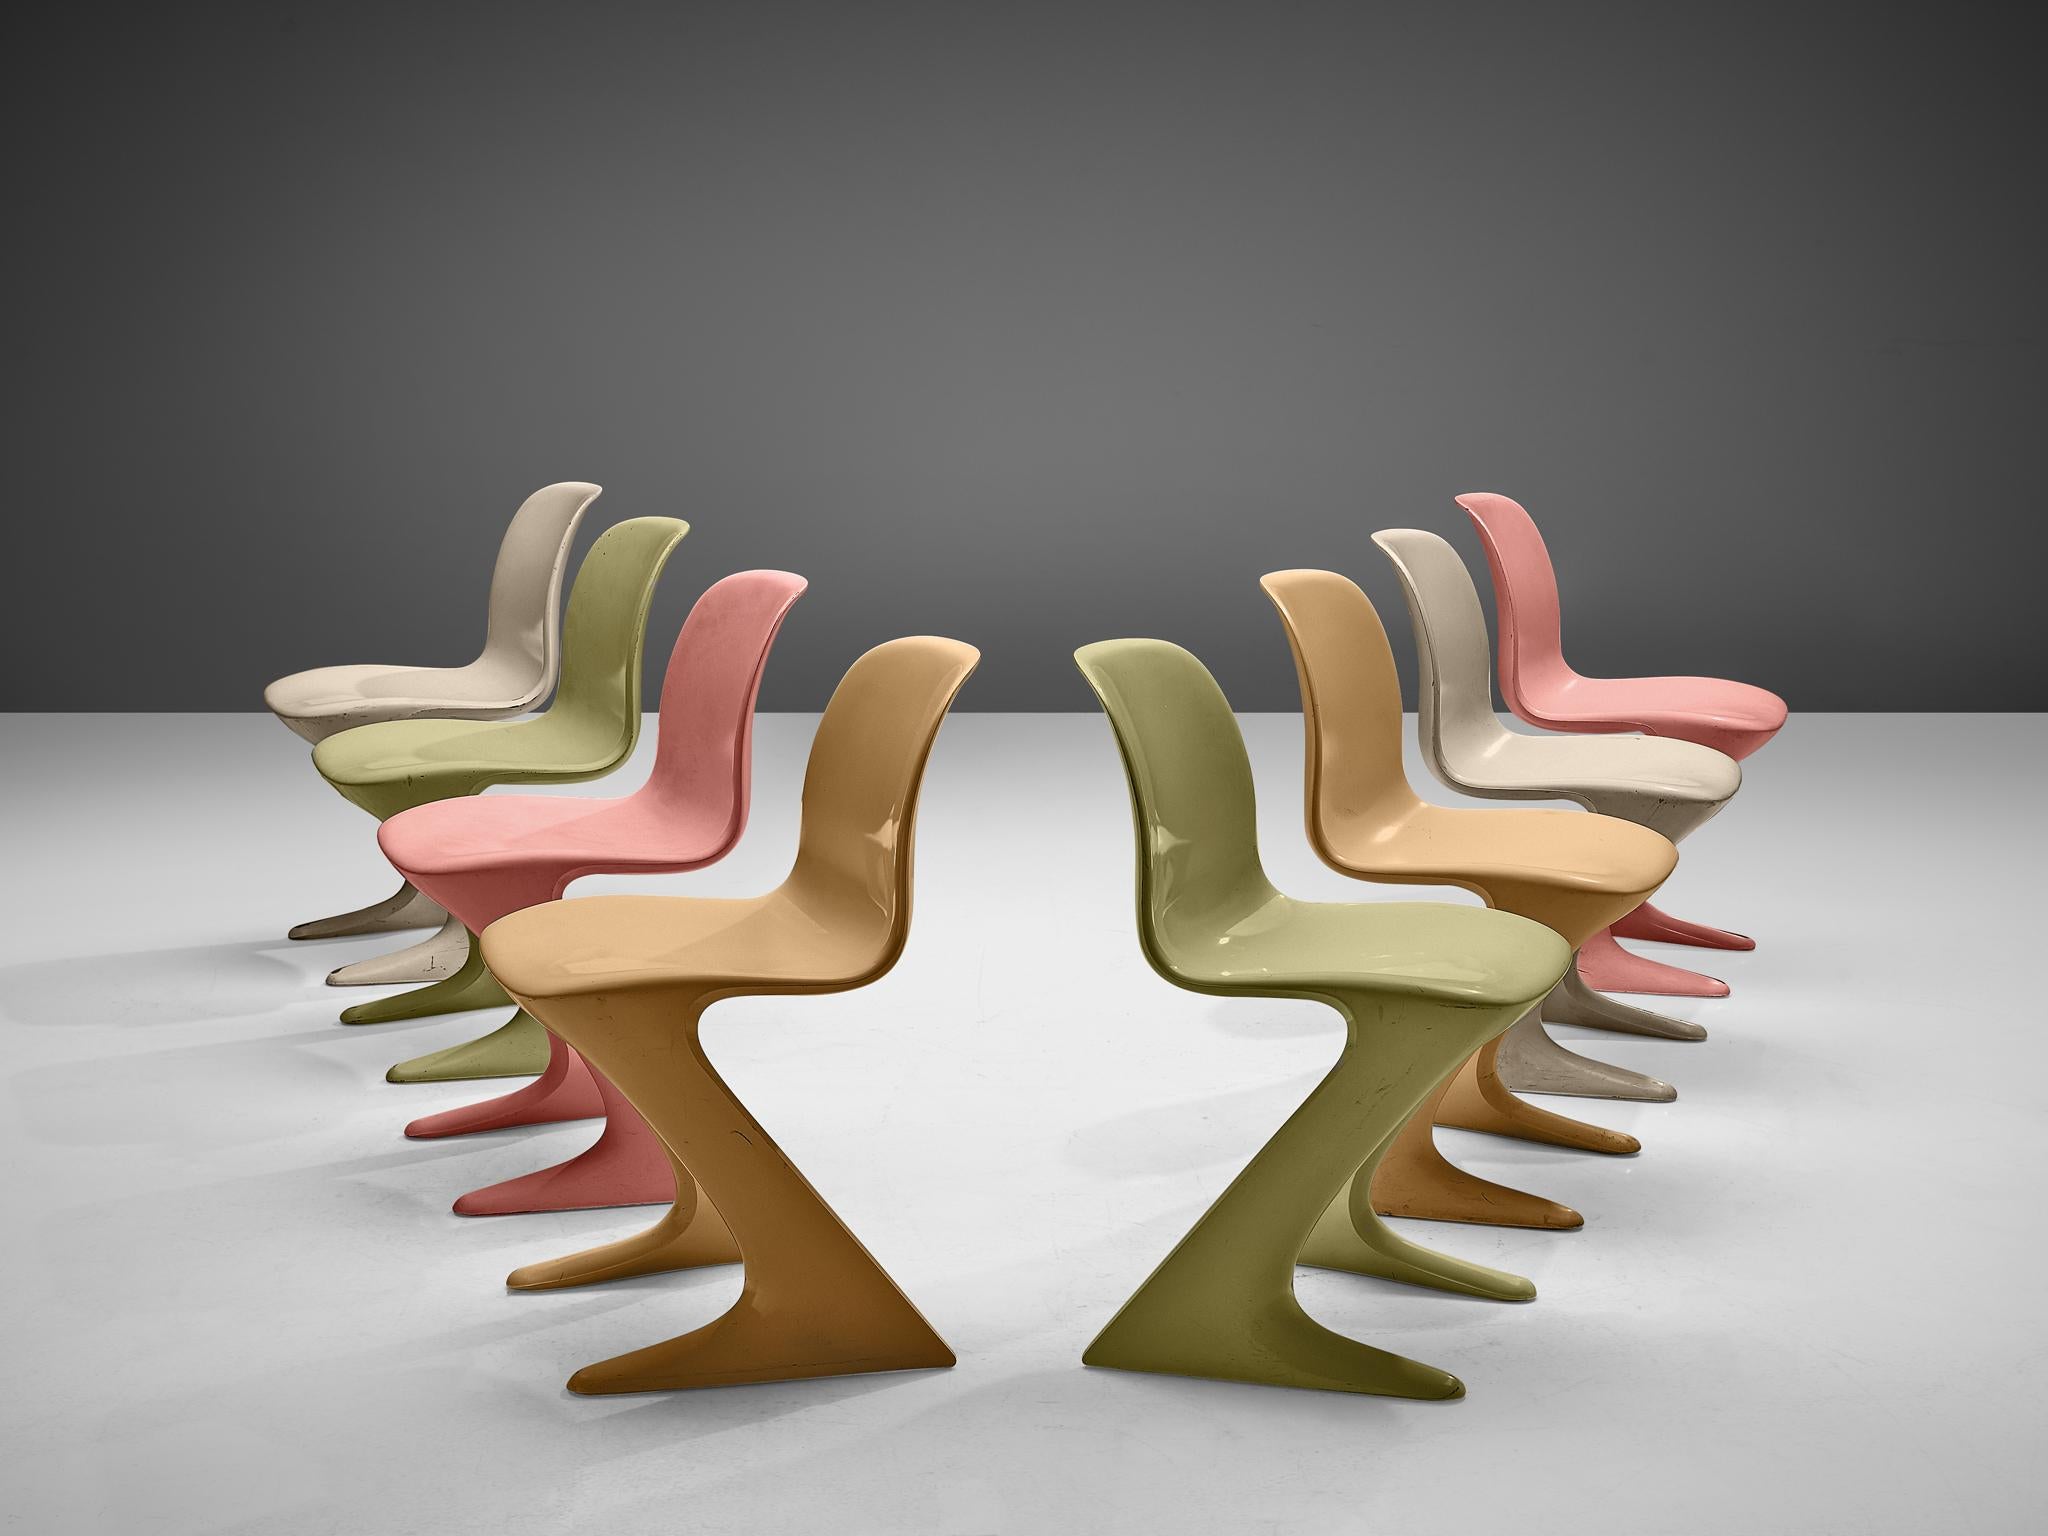 Ernst Moeckl for Trabant, set of eight 'Z' chairs, fiberglass, Germany, 1968

This set of Kangaroo chairs is designed by Ernste Moeckl in 1968. The chair is also called the Z-chair, referring to its shape. During the period of the Iron Curtain, the